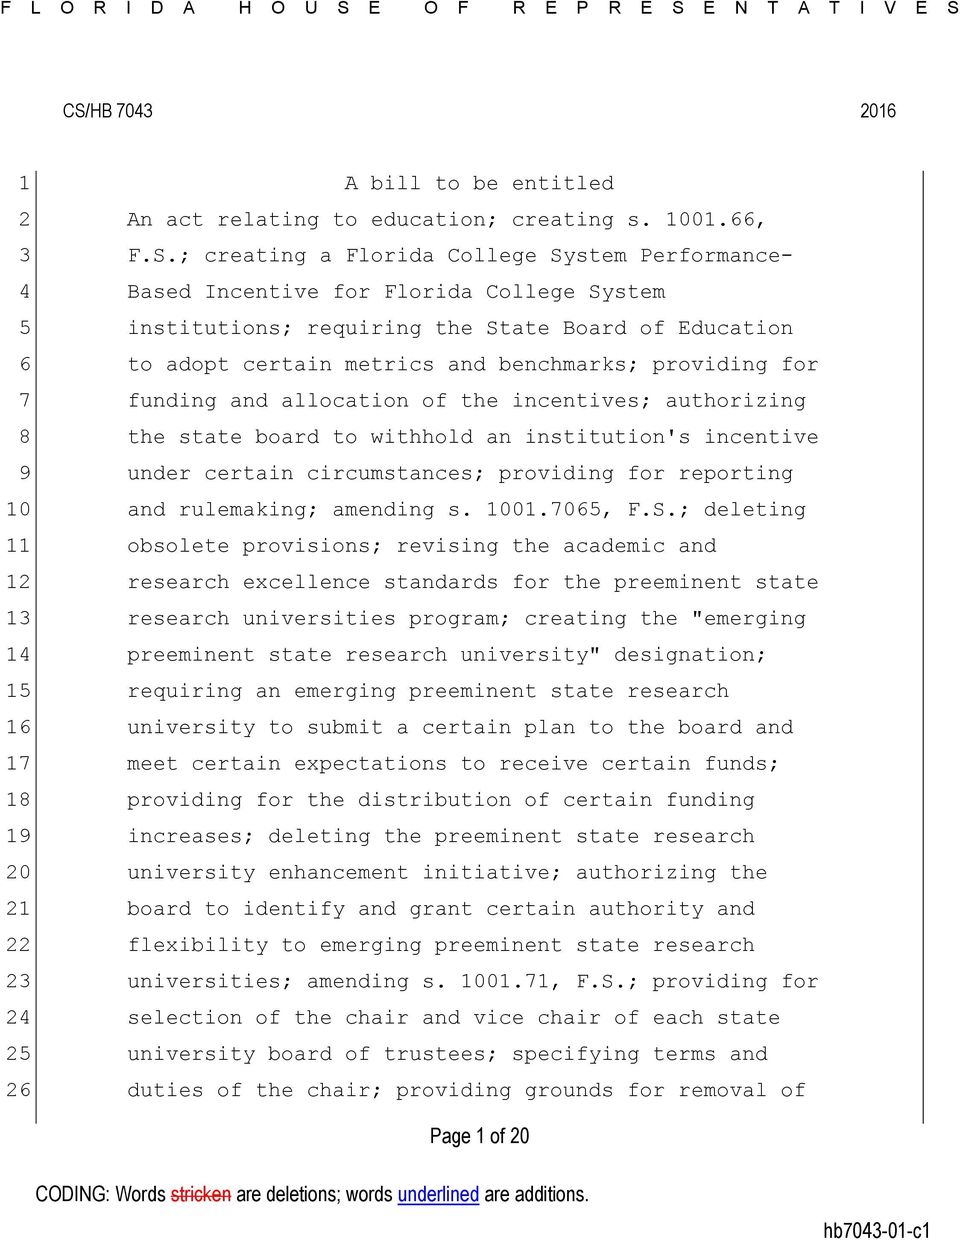 funding and allocation of the incentives; authorizing the state board to withhold an institution's incentive under certain circumstances; providing for reporting and rulemaking; amending s. 1001.